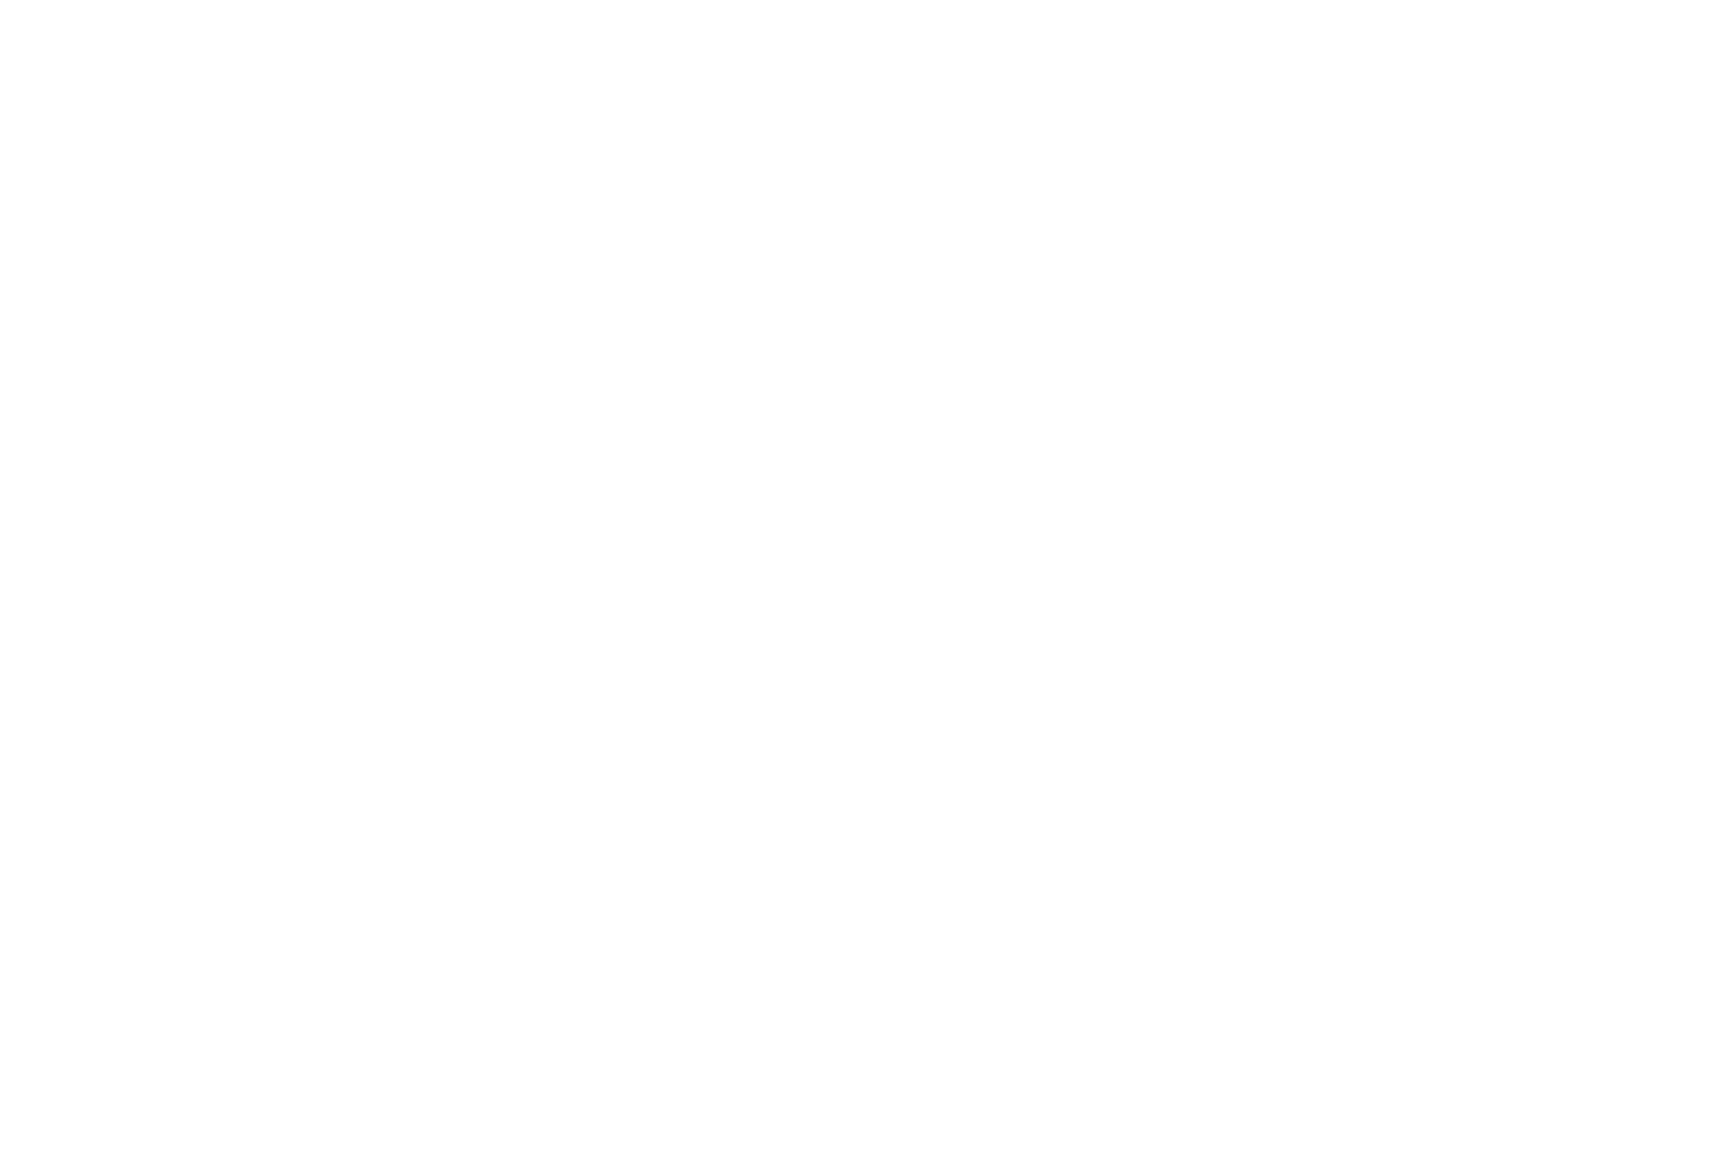 OFFICIAL SELECTION 2022 - FLORENCE FILM AWARDS - ONEFIFTY - XTC